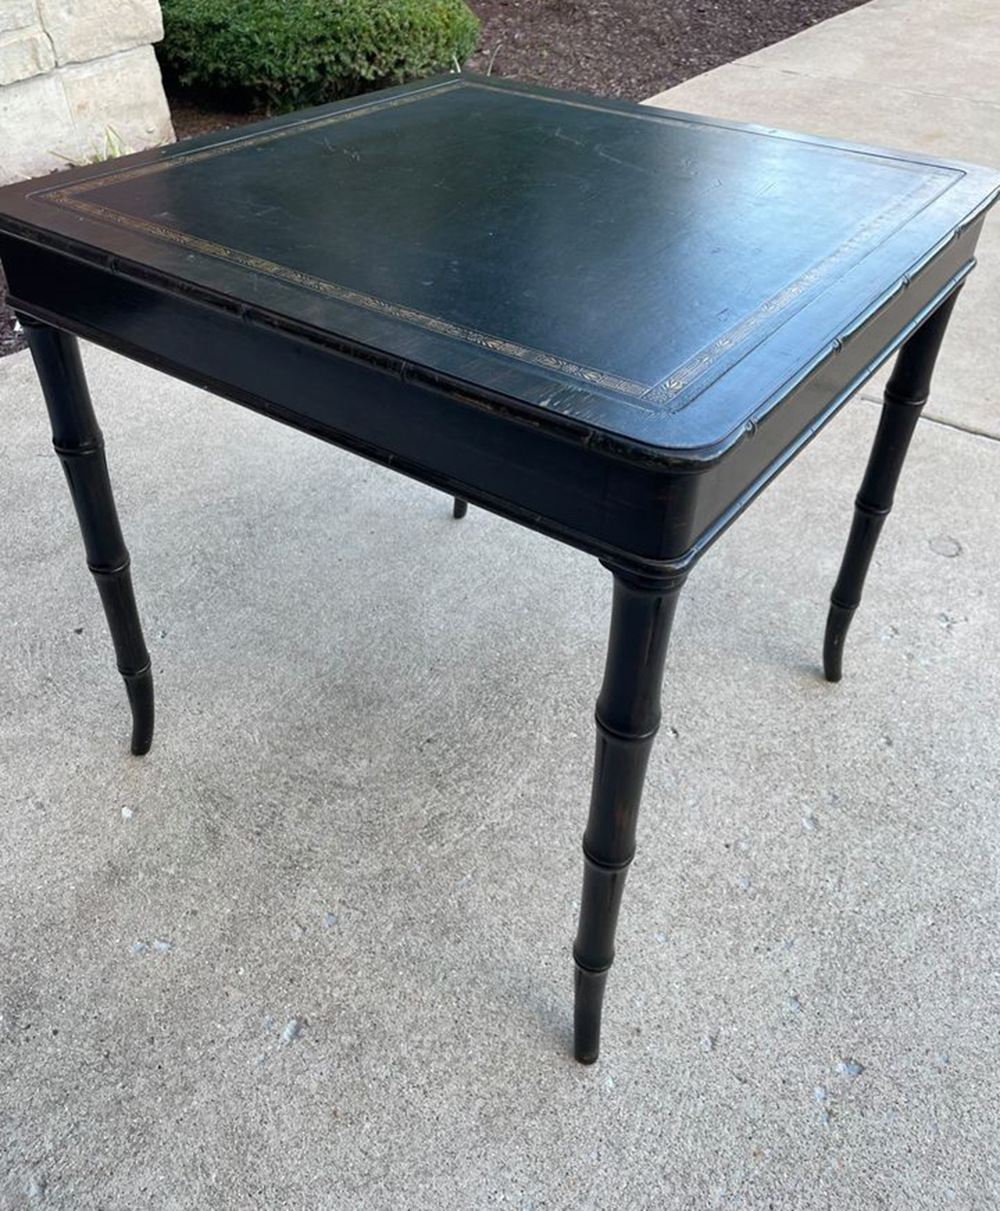 Facebook Marketplace Finds : St. Louis, MO - roomfortuesday.com